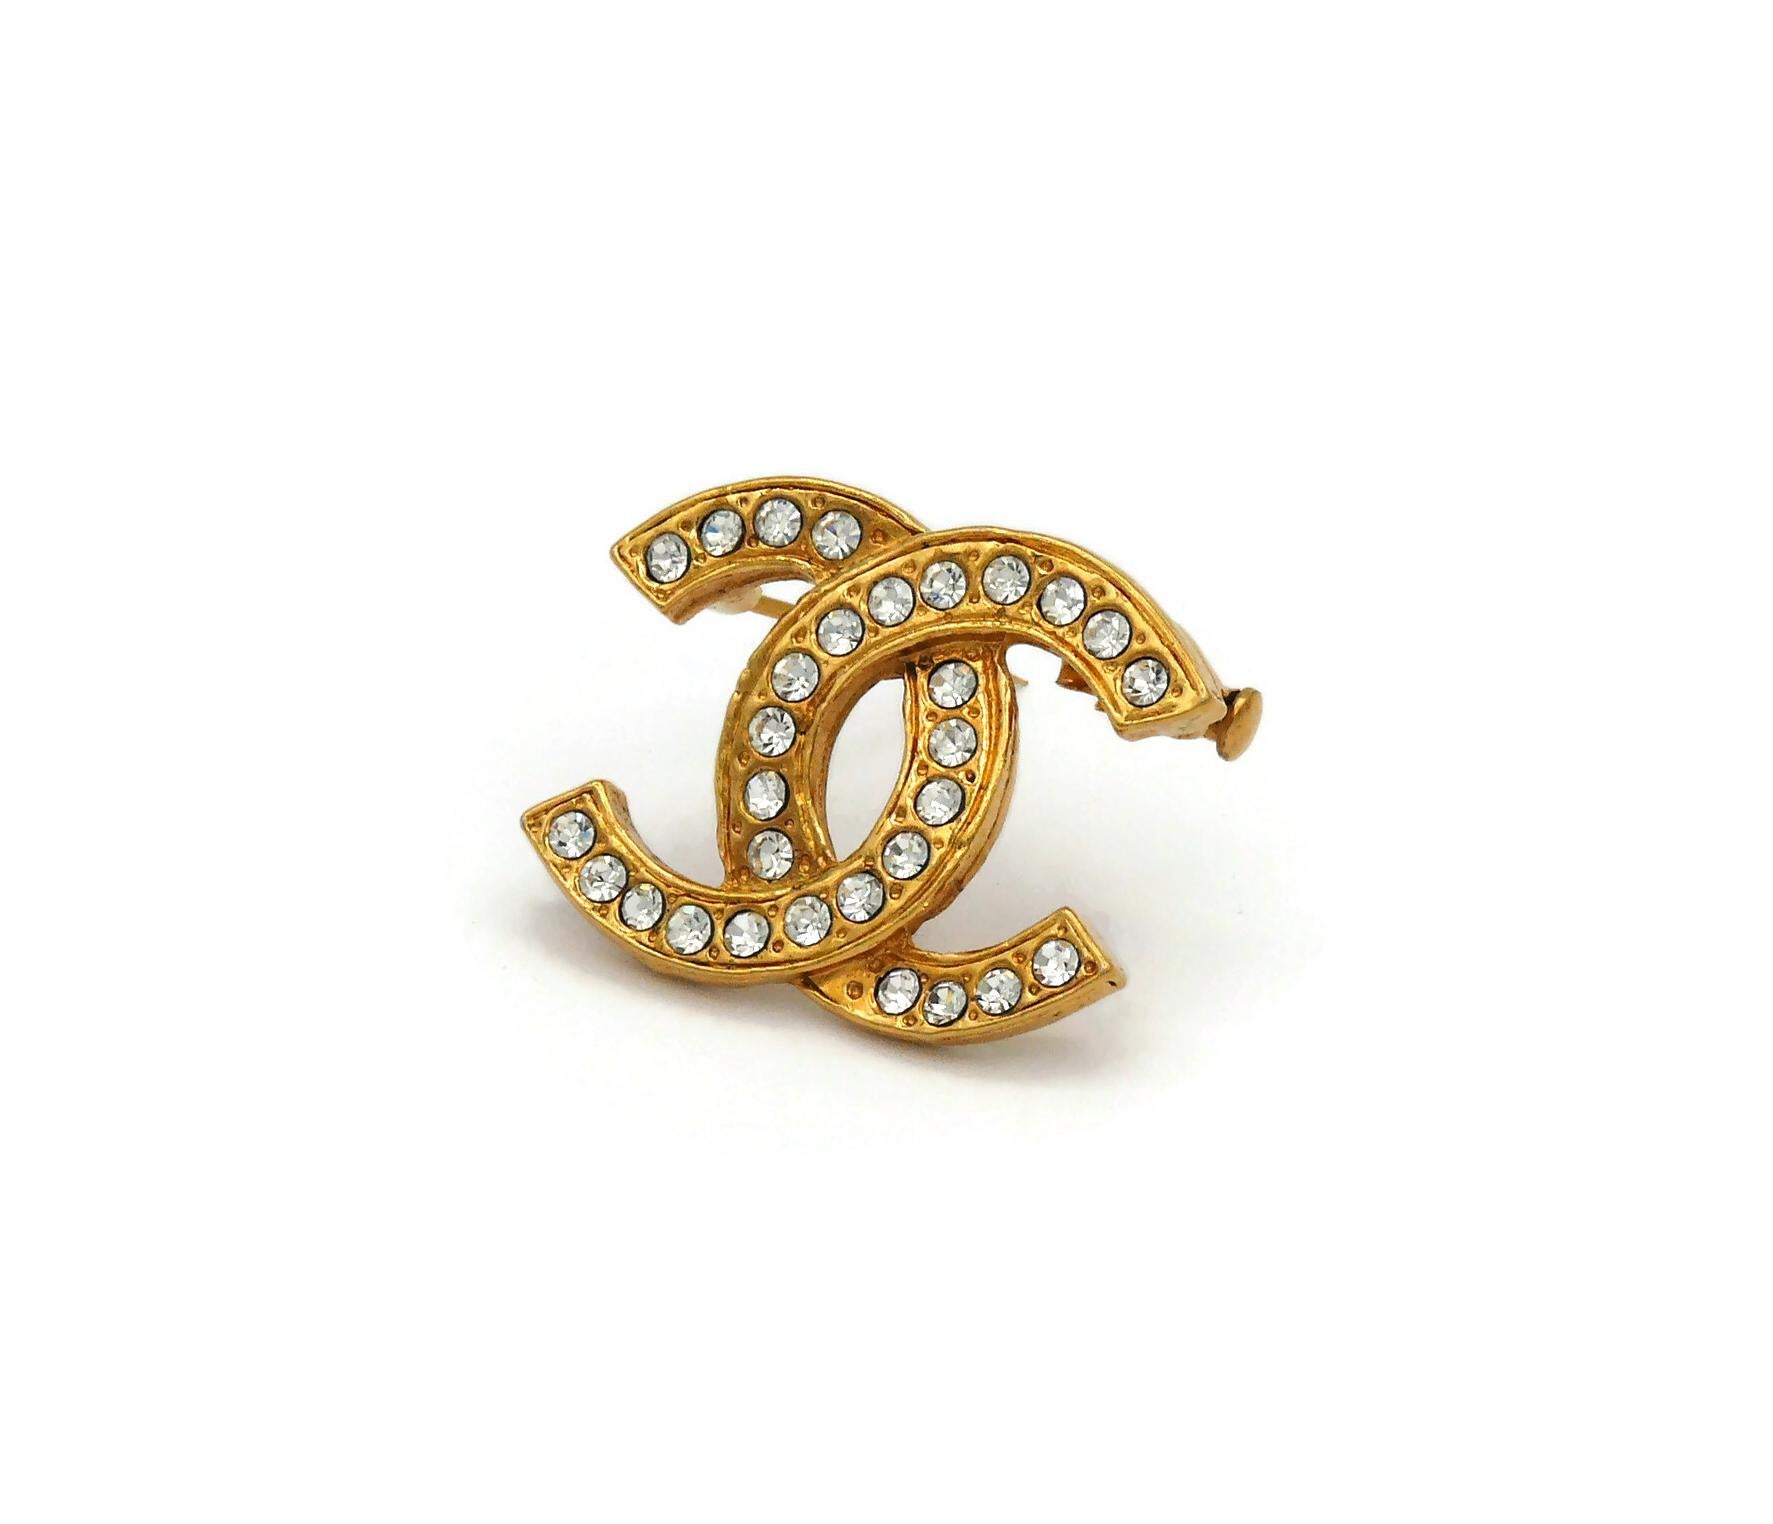 CHANEL Vintage Gold Tone Jewelled CC Brooch For Sale 1